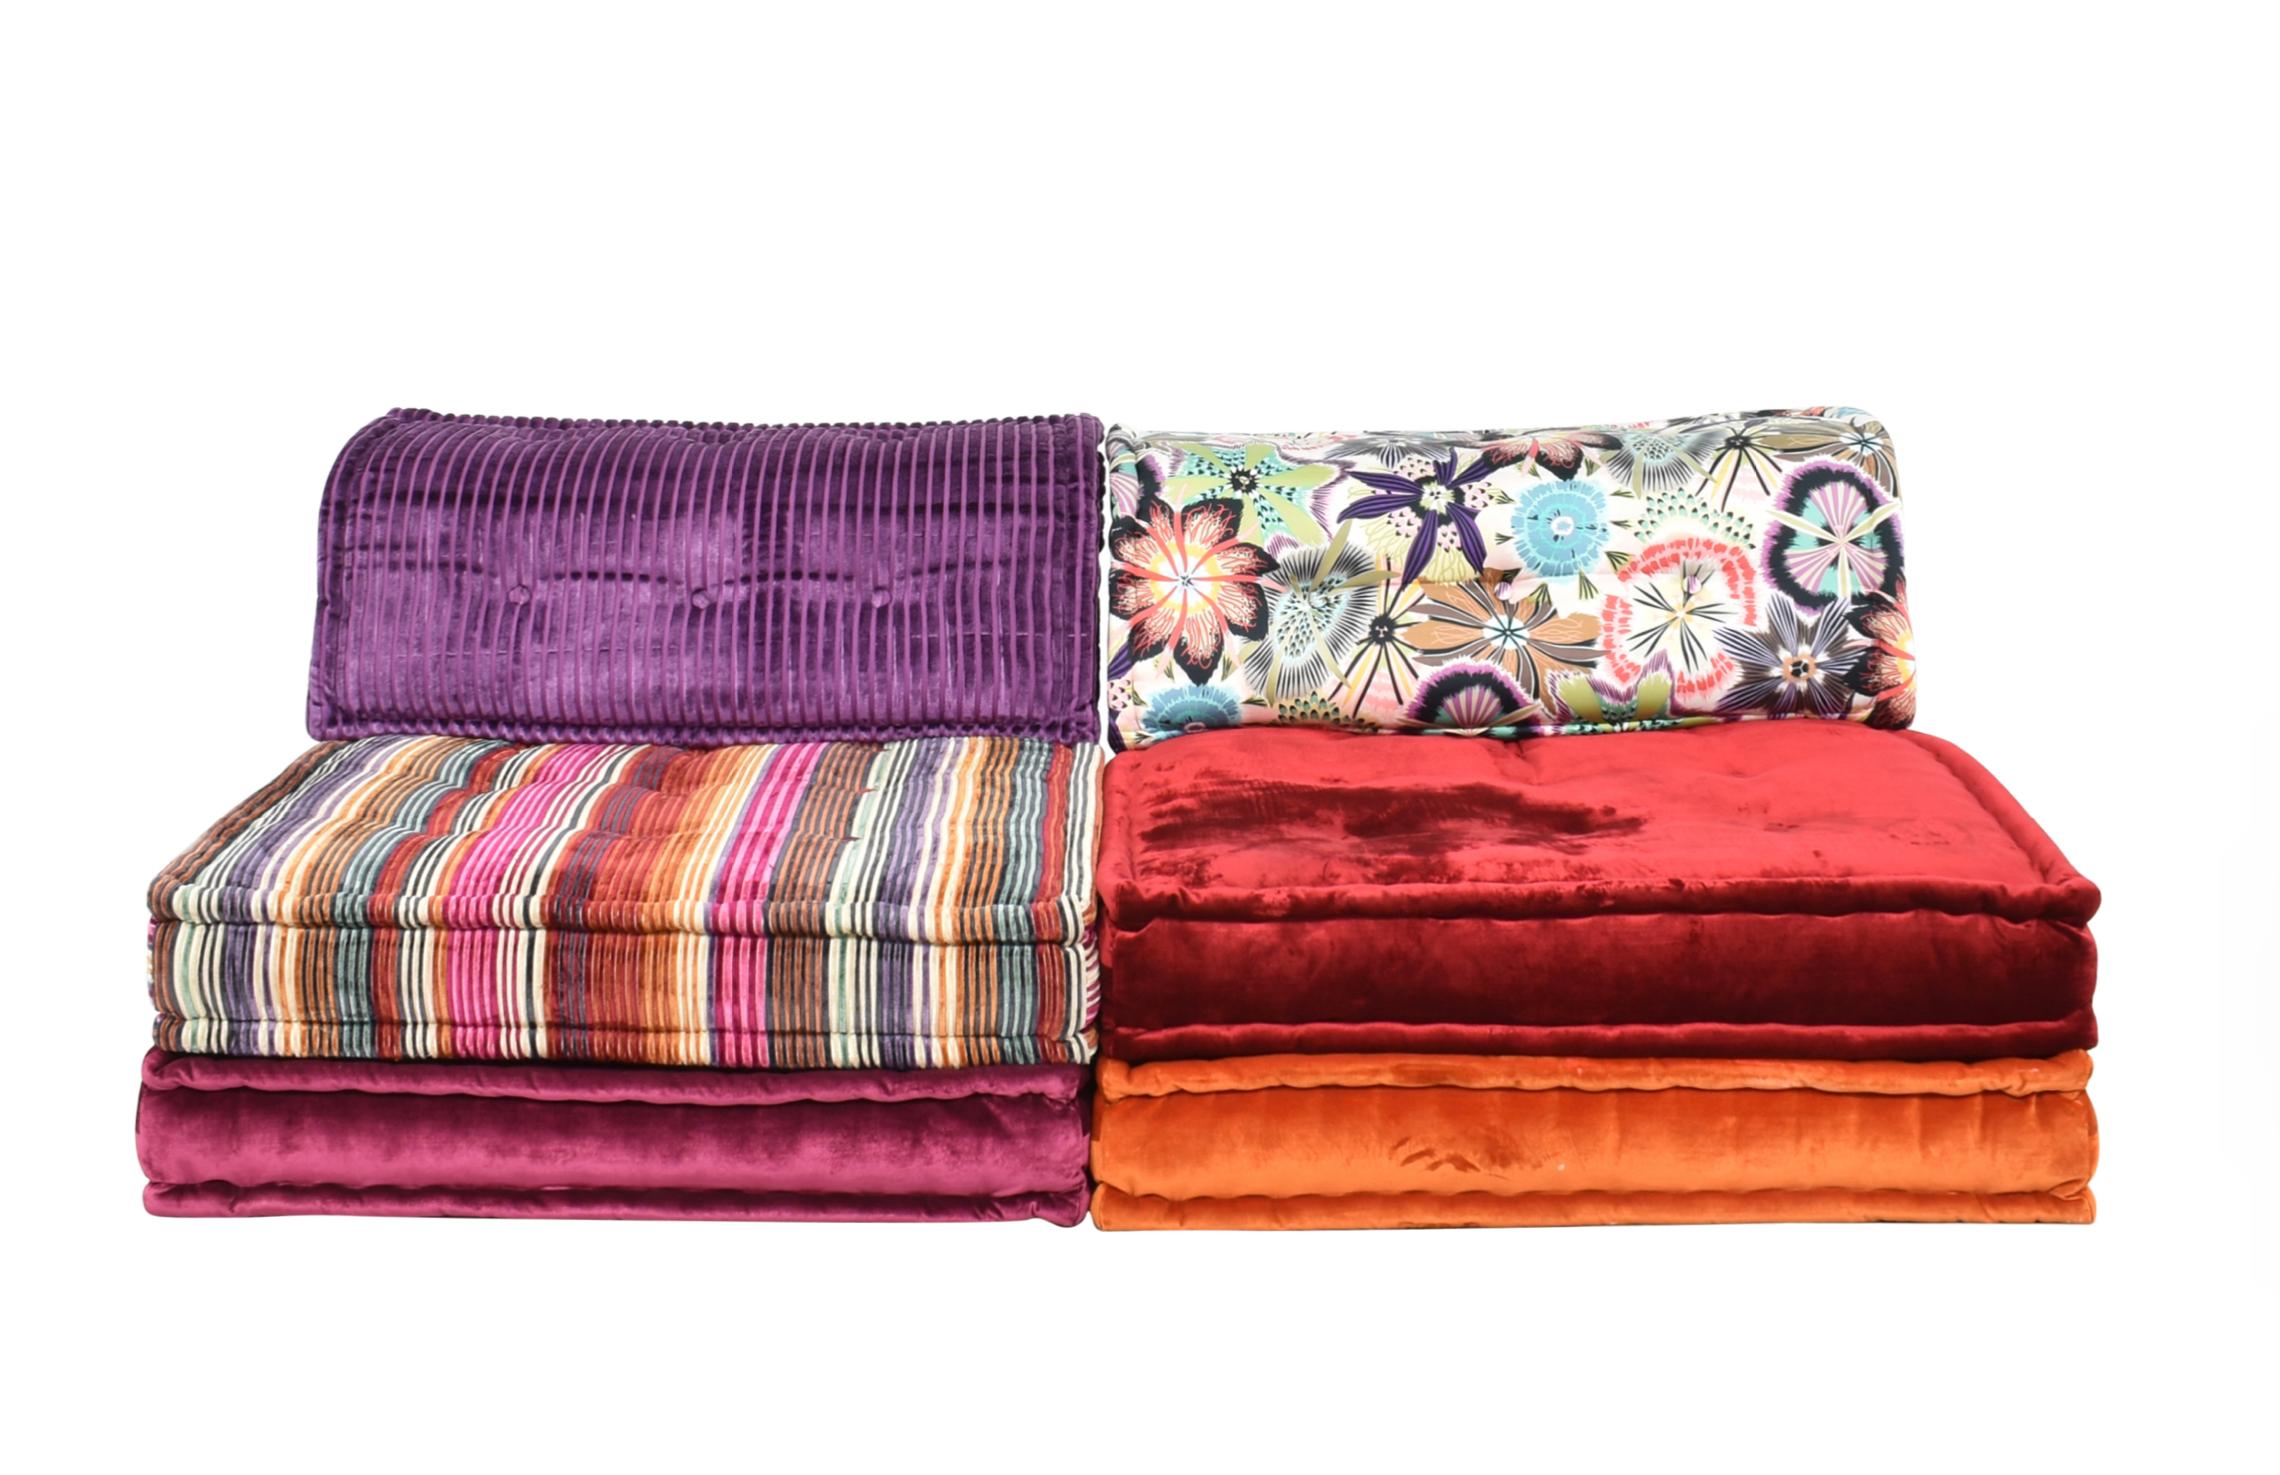 Mah Jong modular sofa set by Hans Hopfer, designed in 1971 for Roche Bobois and in a current customized mix of textiles from Sonia Rykiel and the house of Missoni. Features multiple cushions that can be arranged in endless number of ways Mix and